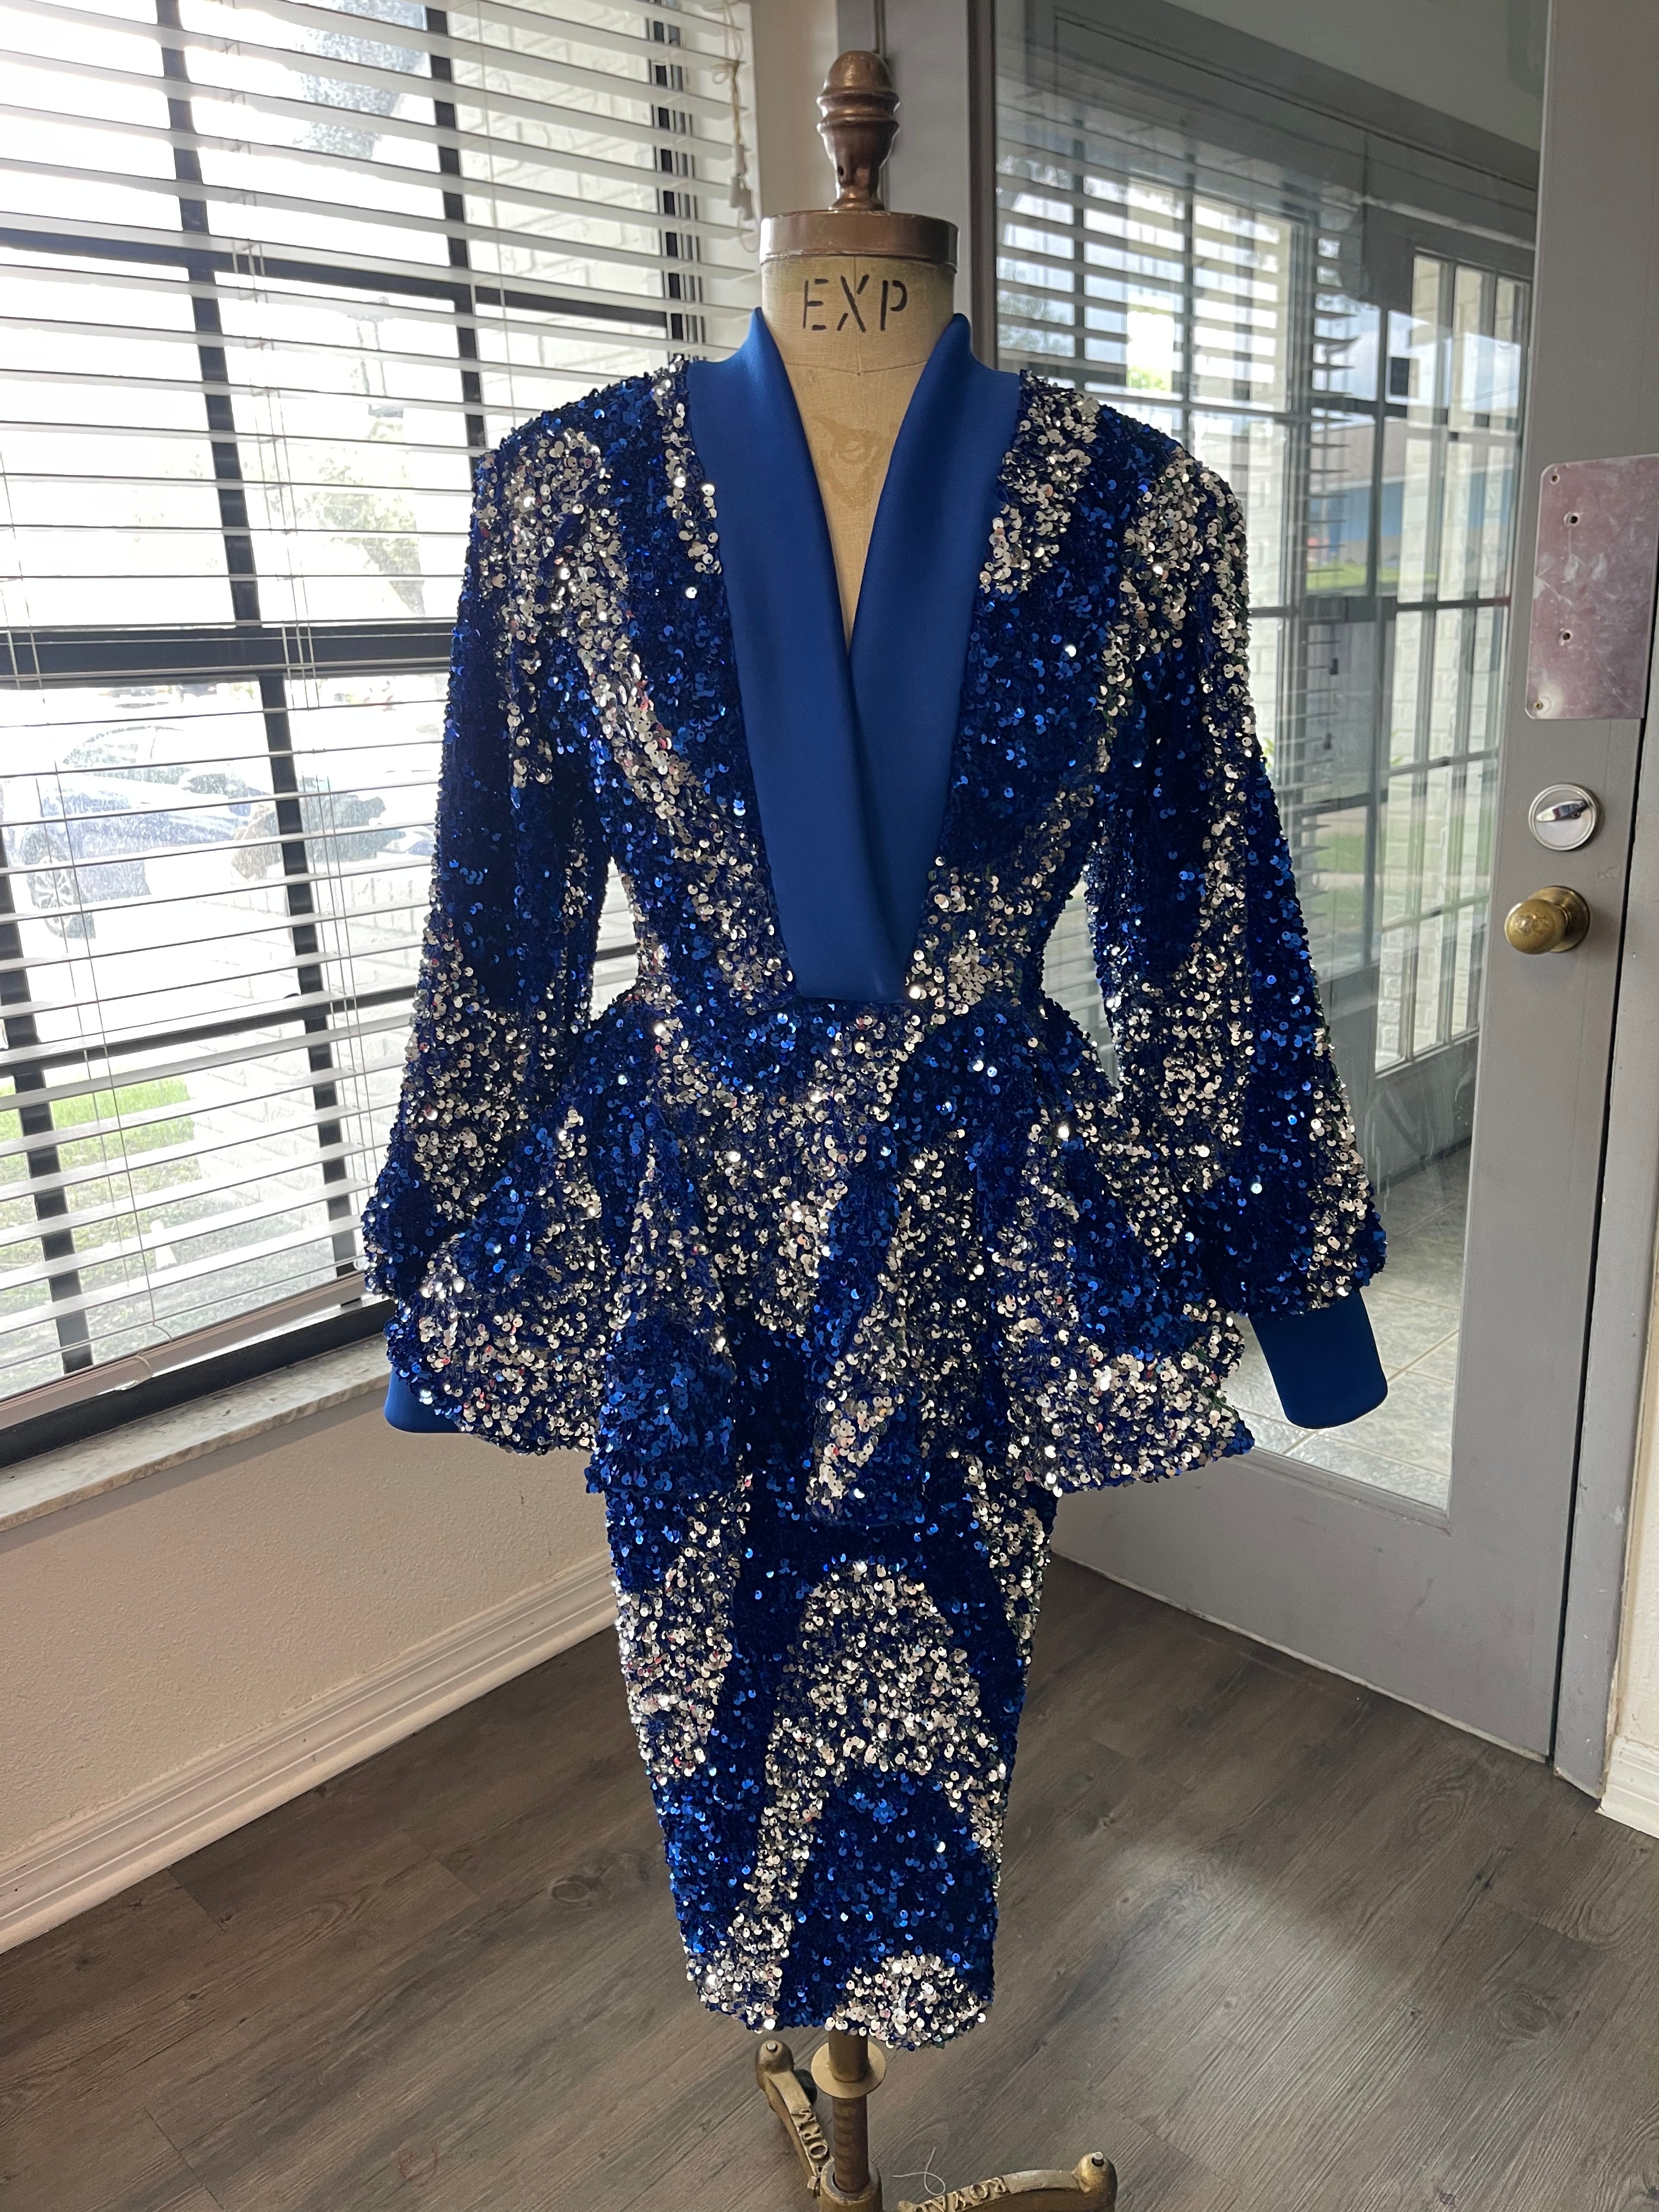 Royal blue and silver peplum